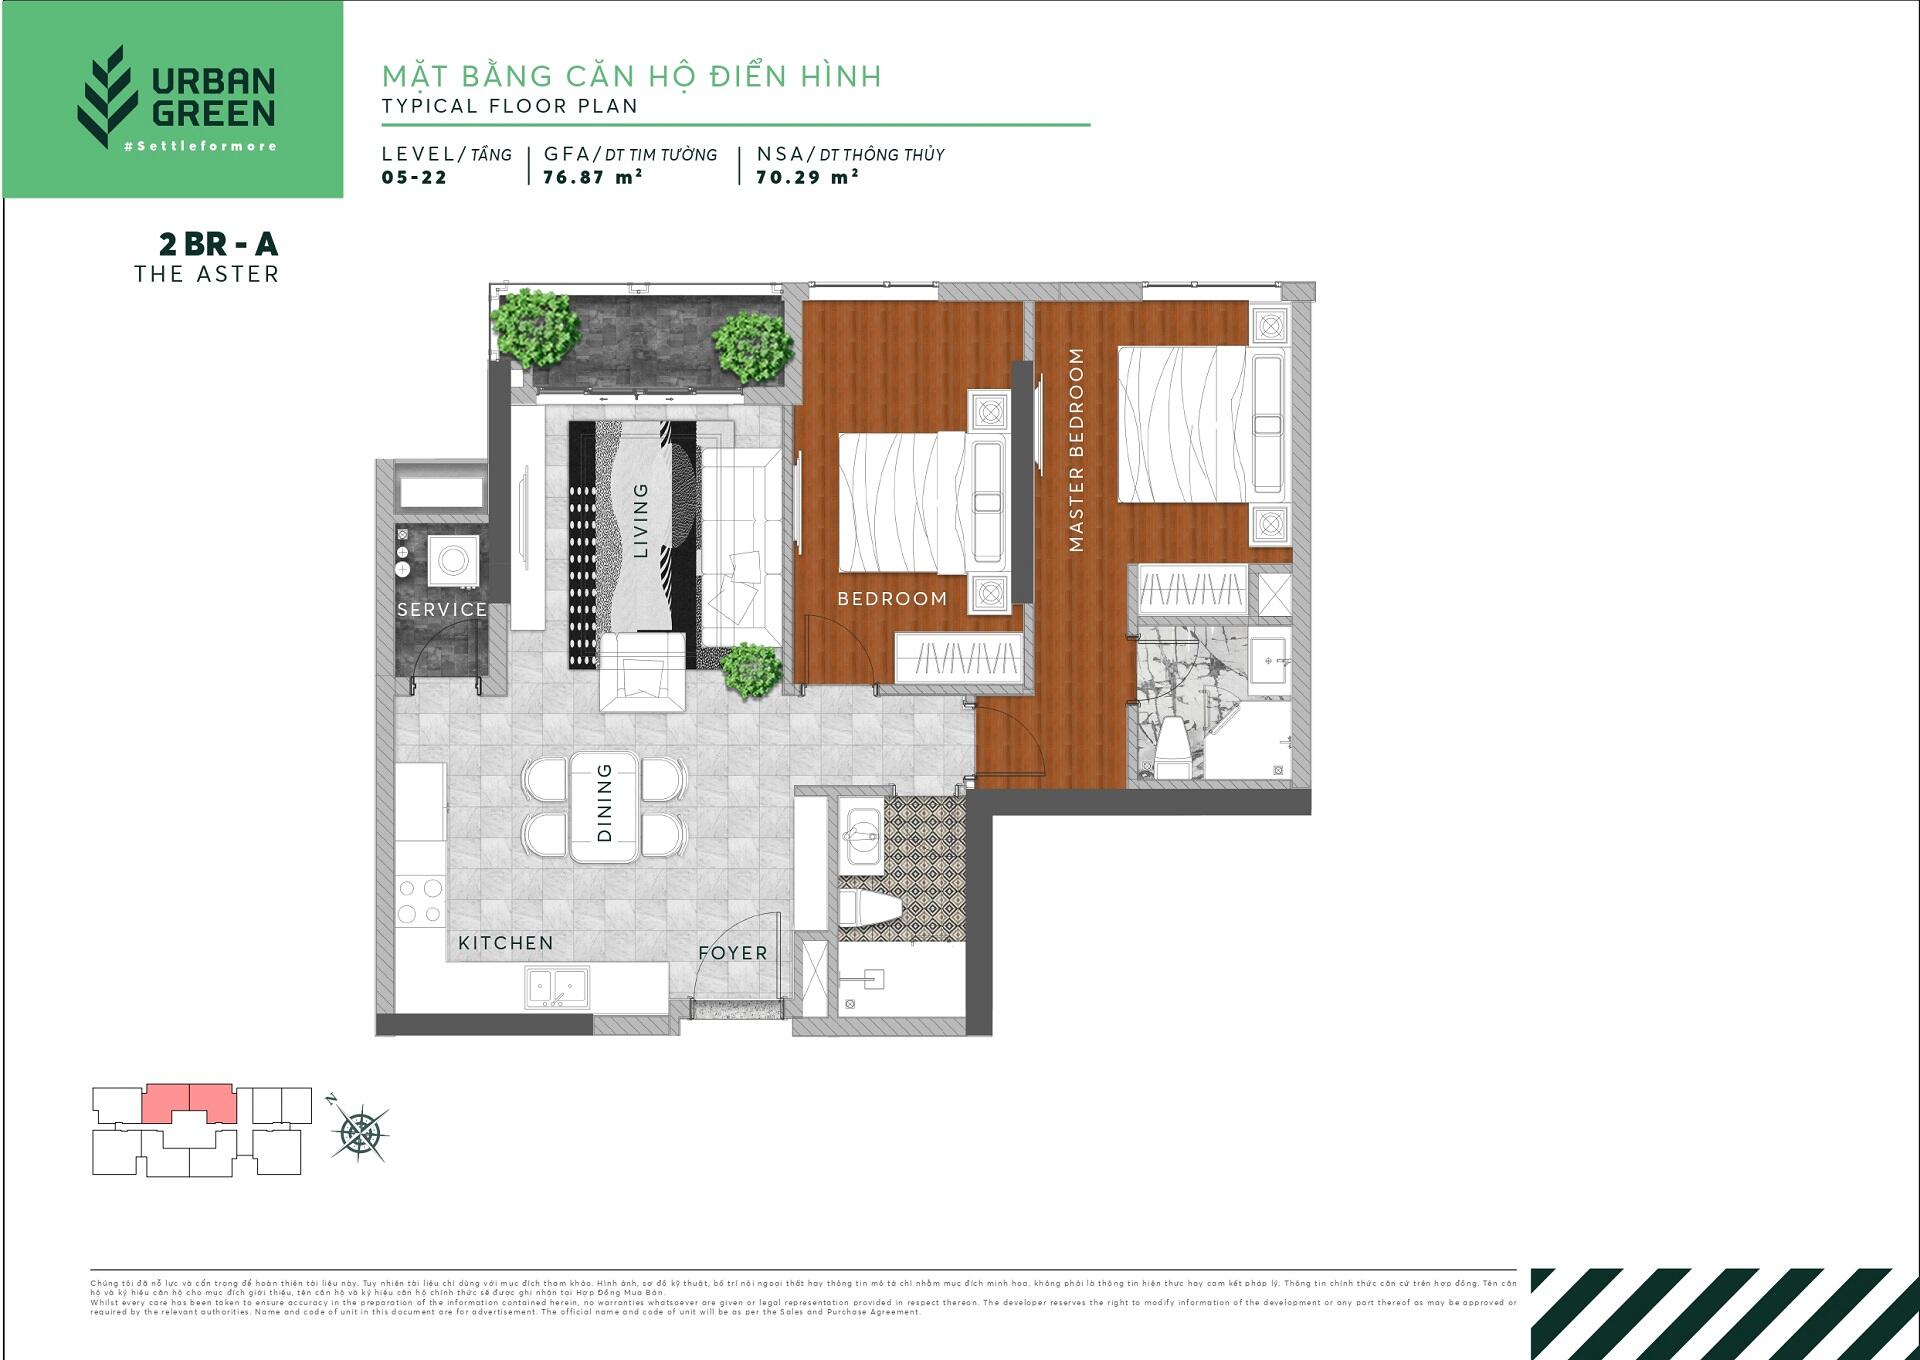 The layout of The Aster apartment 2 bedrooms 2BR - A